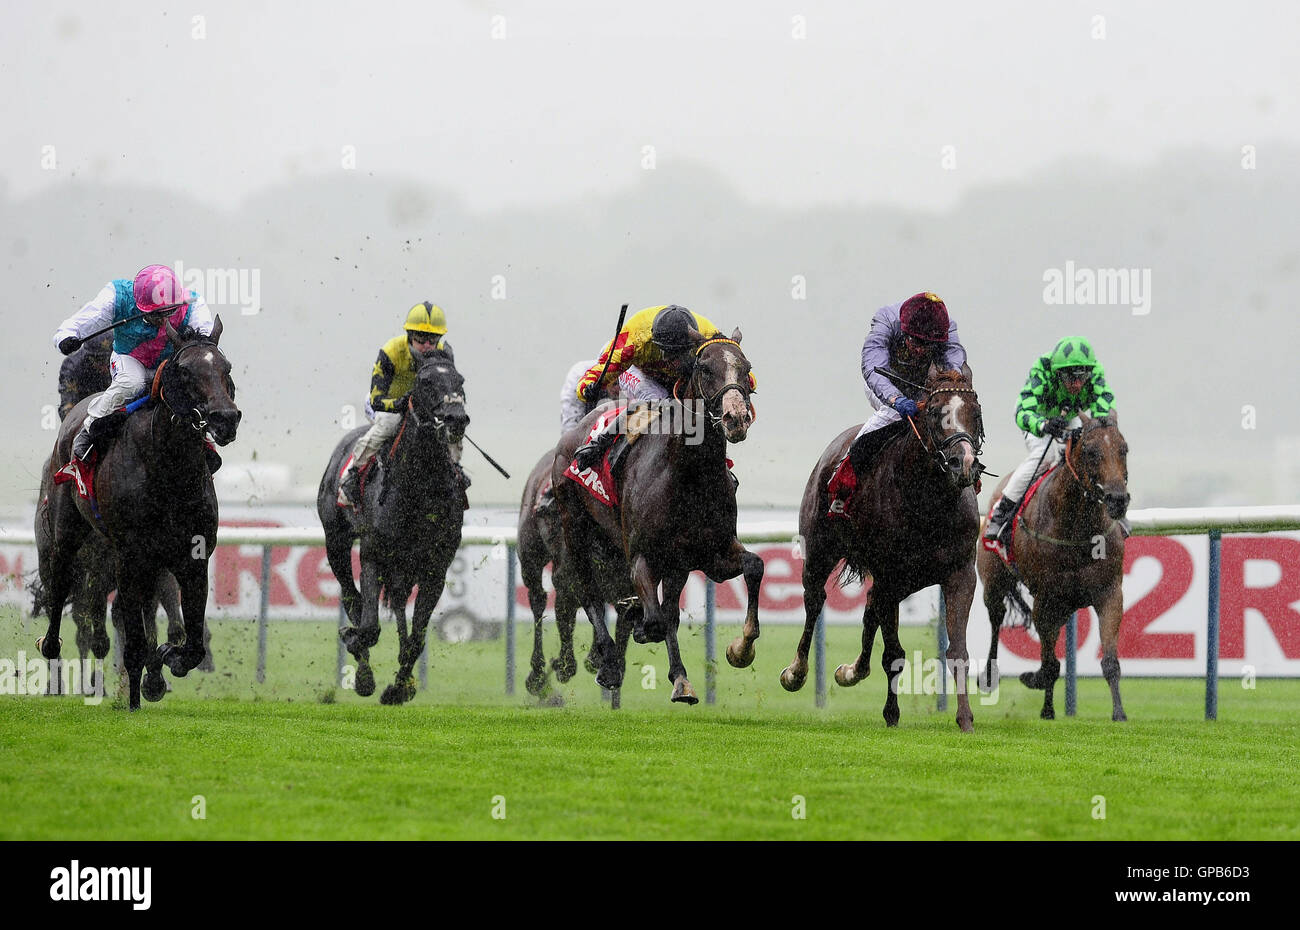 Hathal ridden by Frankie Dettori (second right) beats Mitchum Swagger ridden by George Baker to win the 32 Red Mile race at Haydock Racecouse. Stock Photo